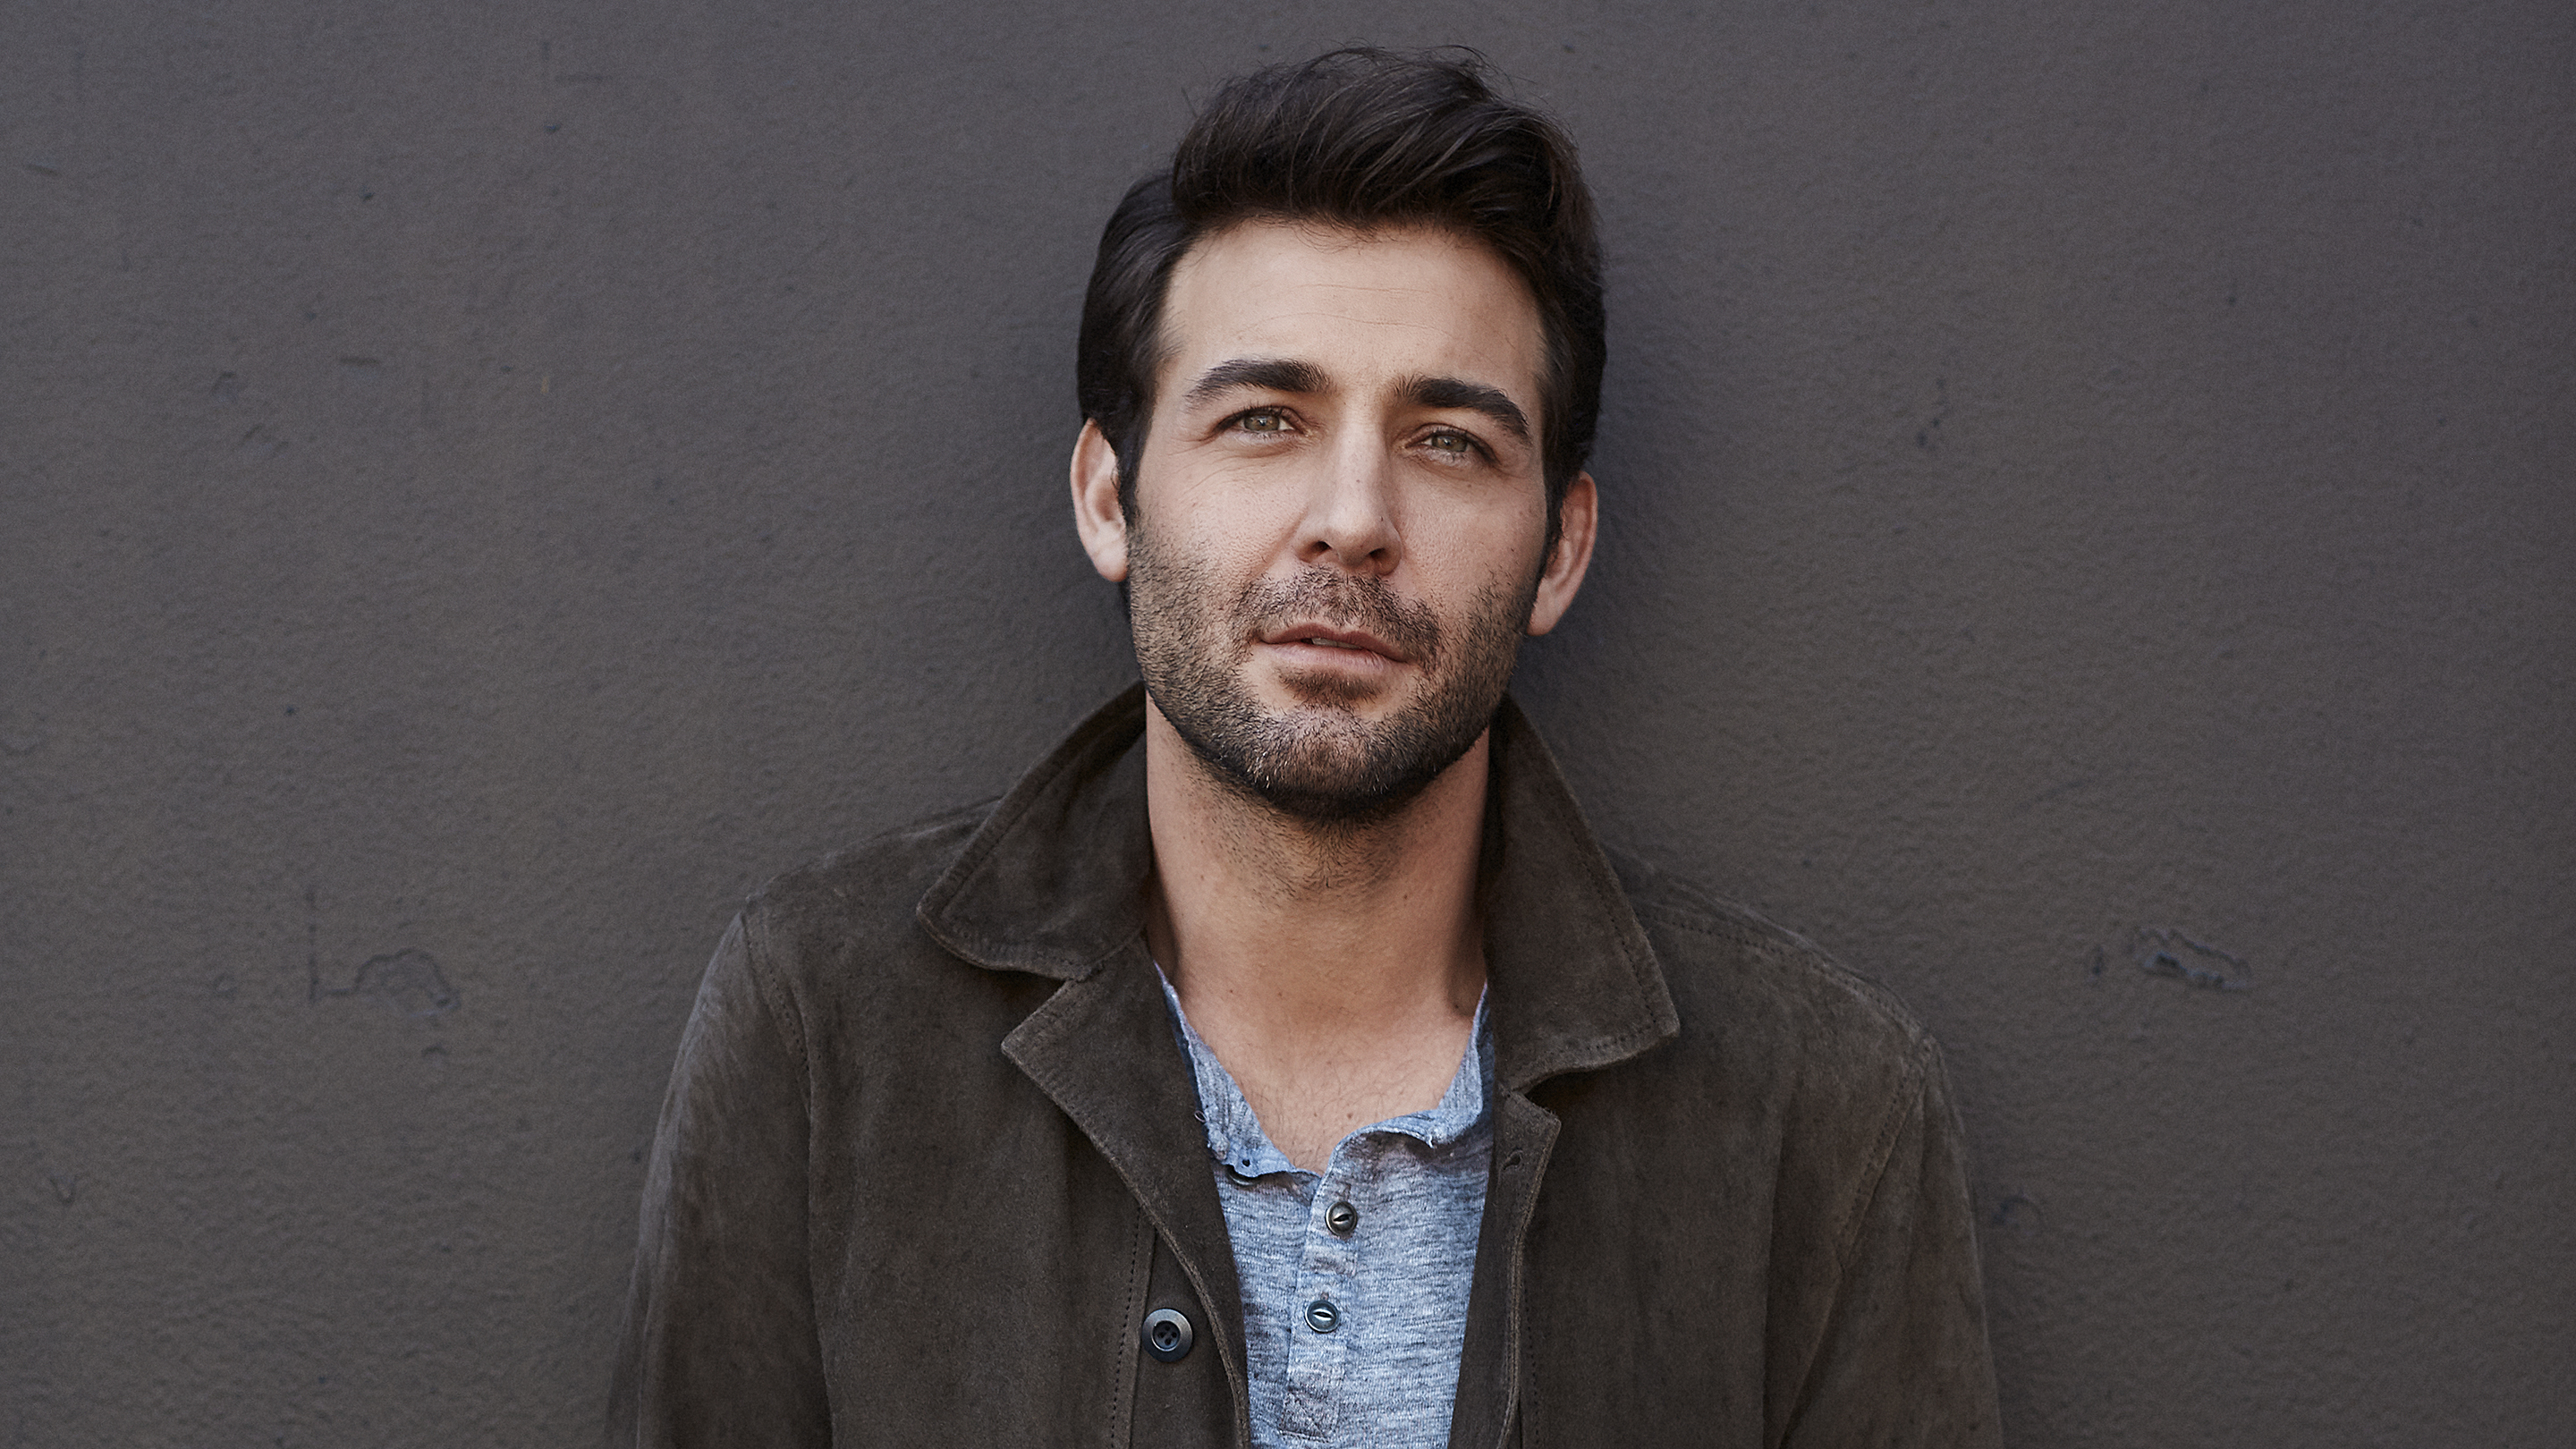 Watchmens James Wolk Tells Playboy About His Racist Politician